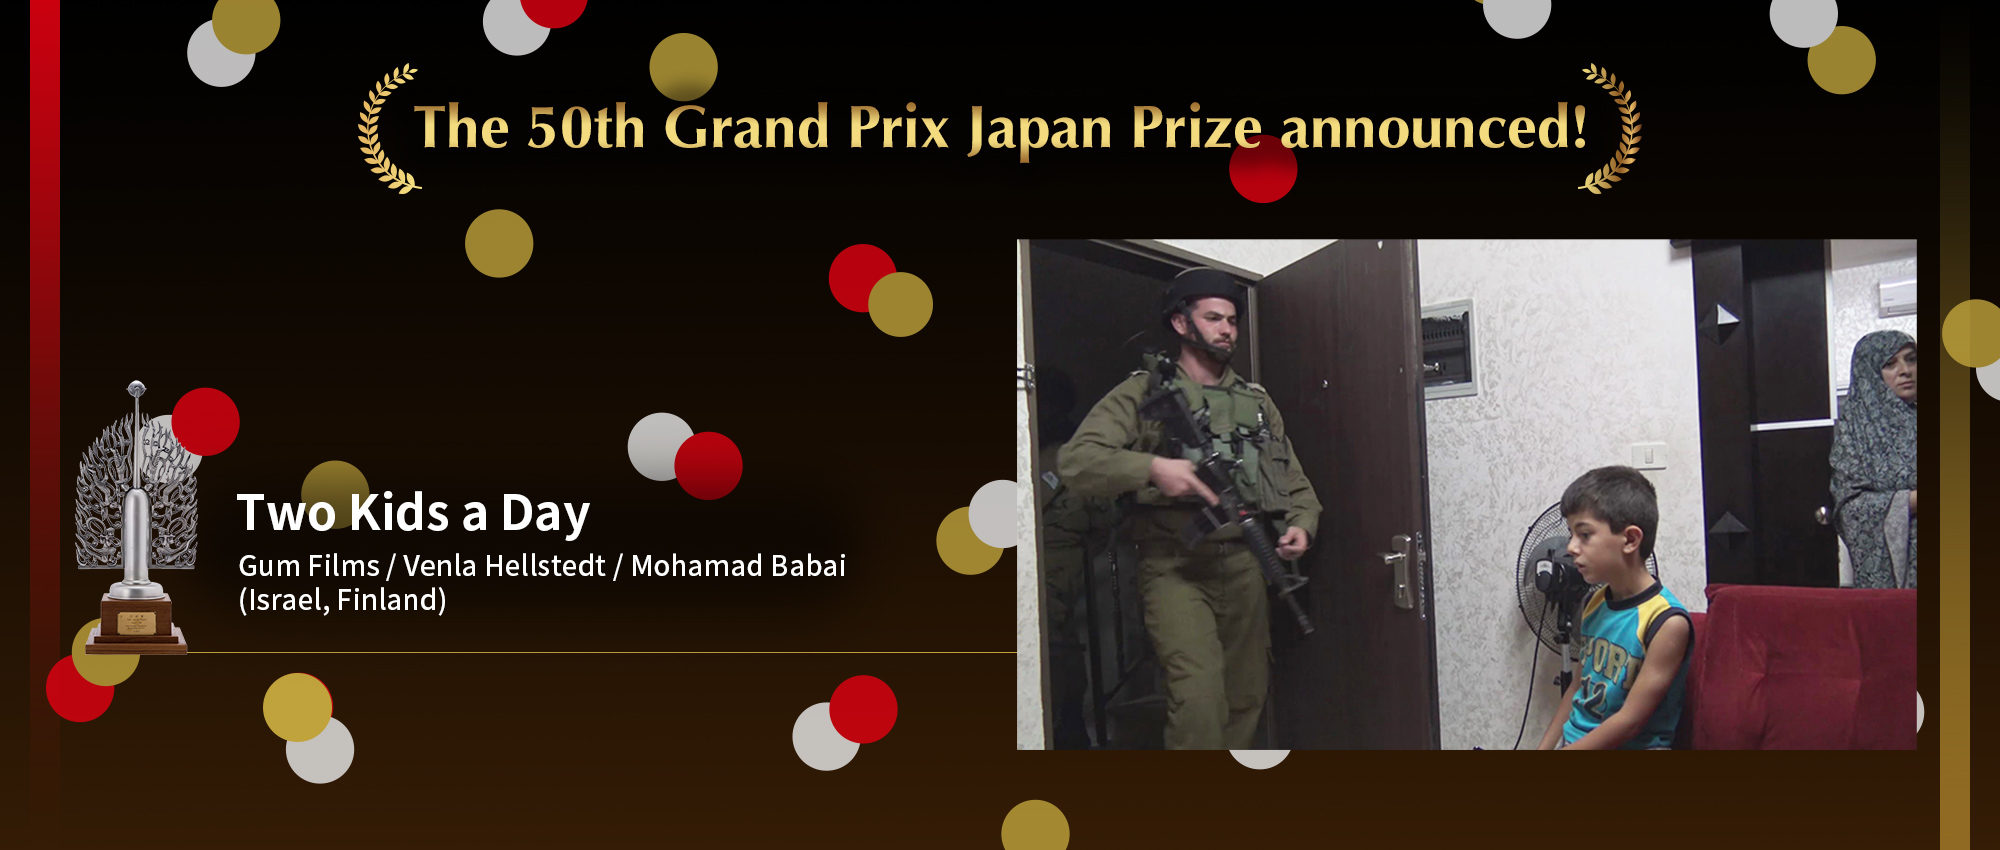 The 50th Grand Prix Japan Prize announced!